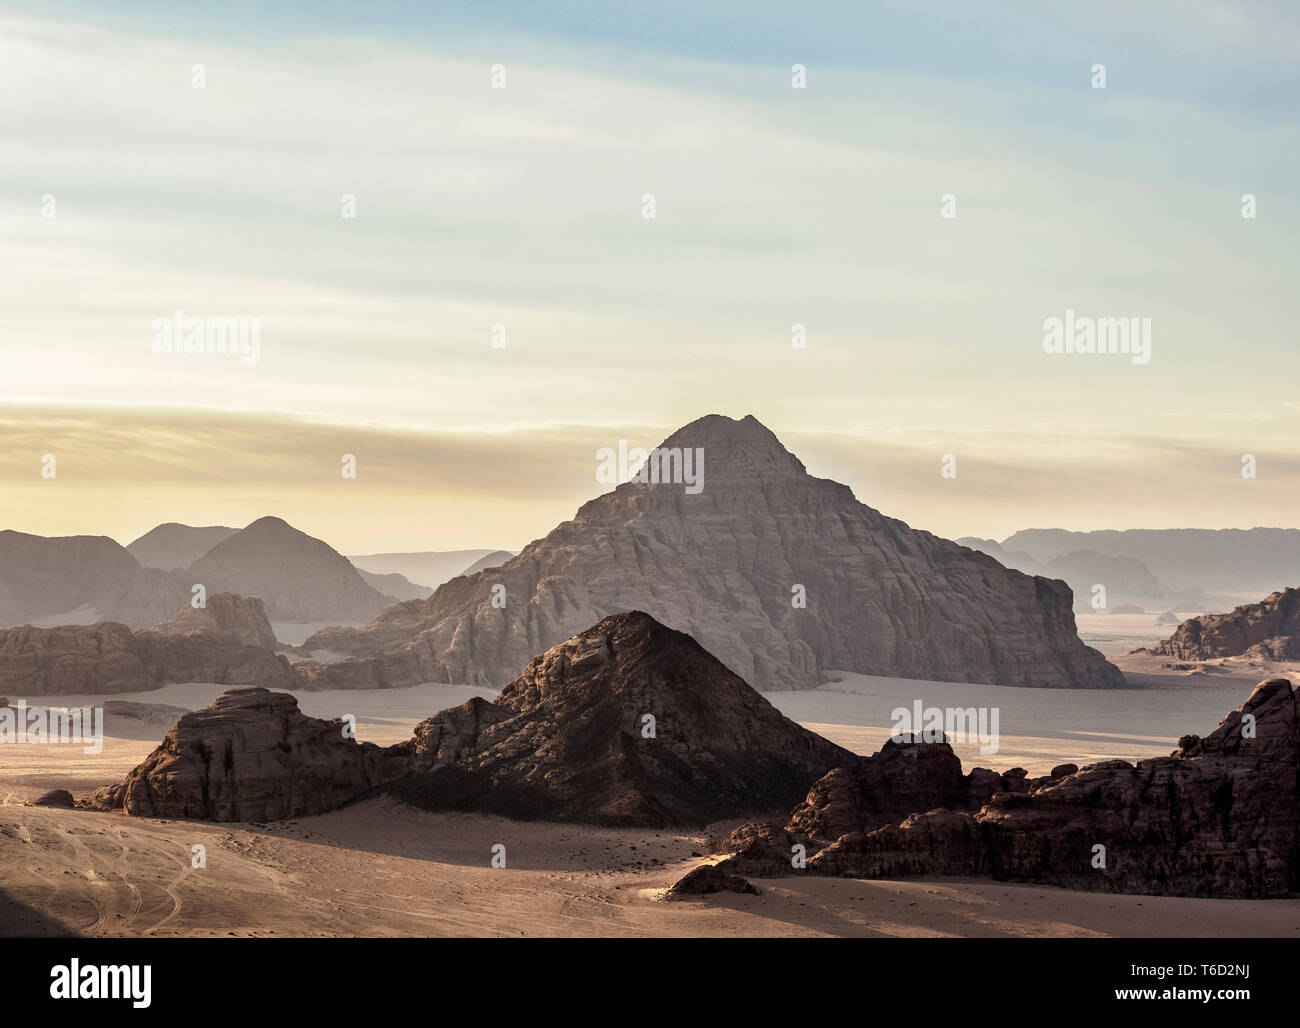 Landscape of Wadi Rum, aerial view from a balloon, Aqaba Governorate, Jordan Stock Photo